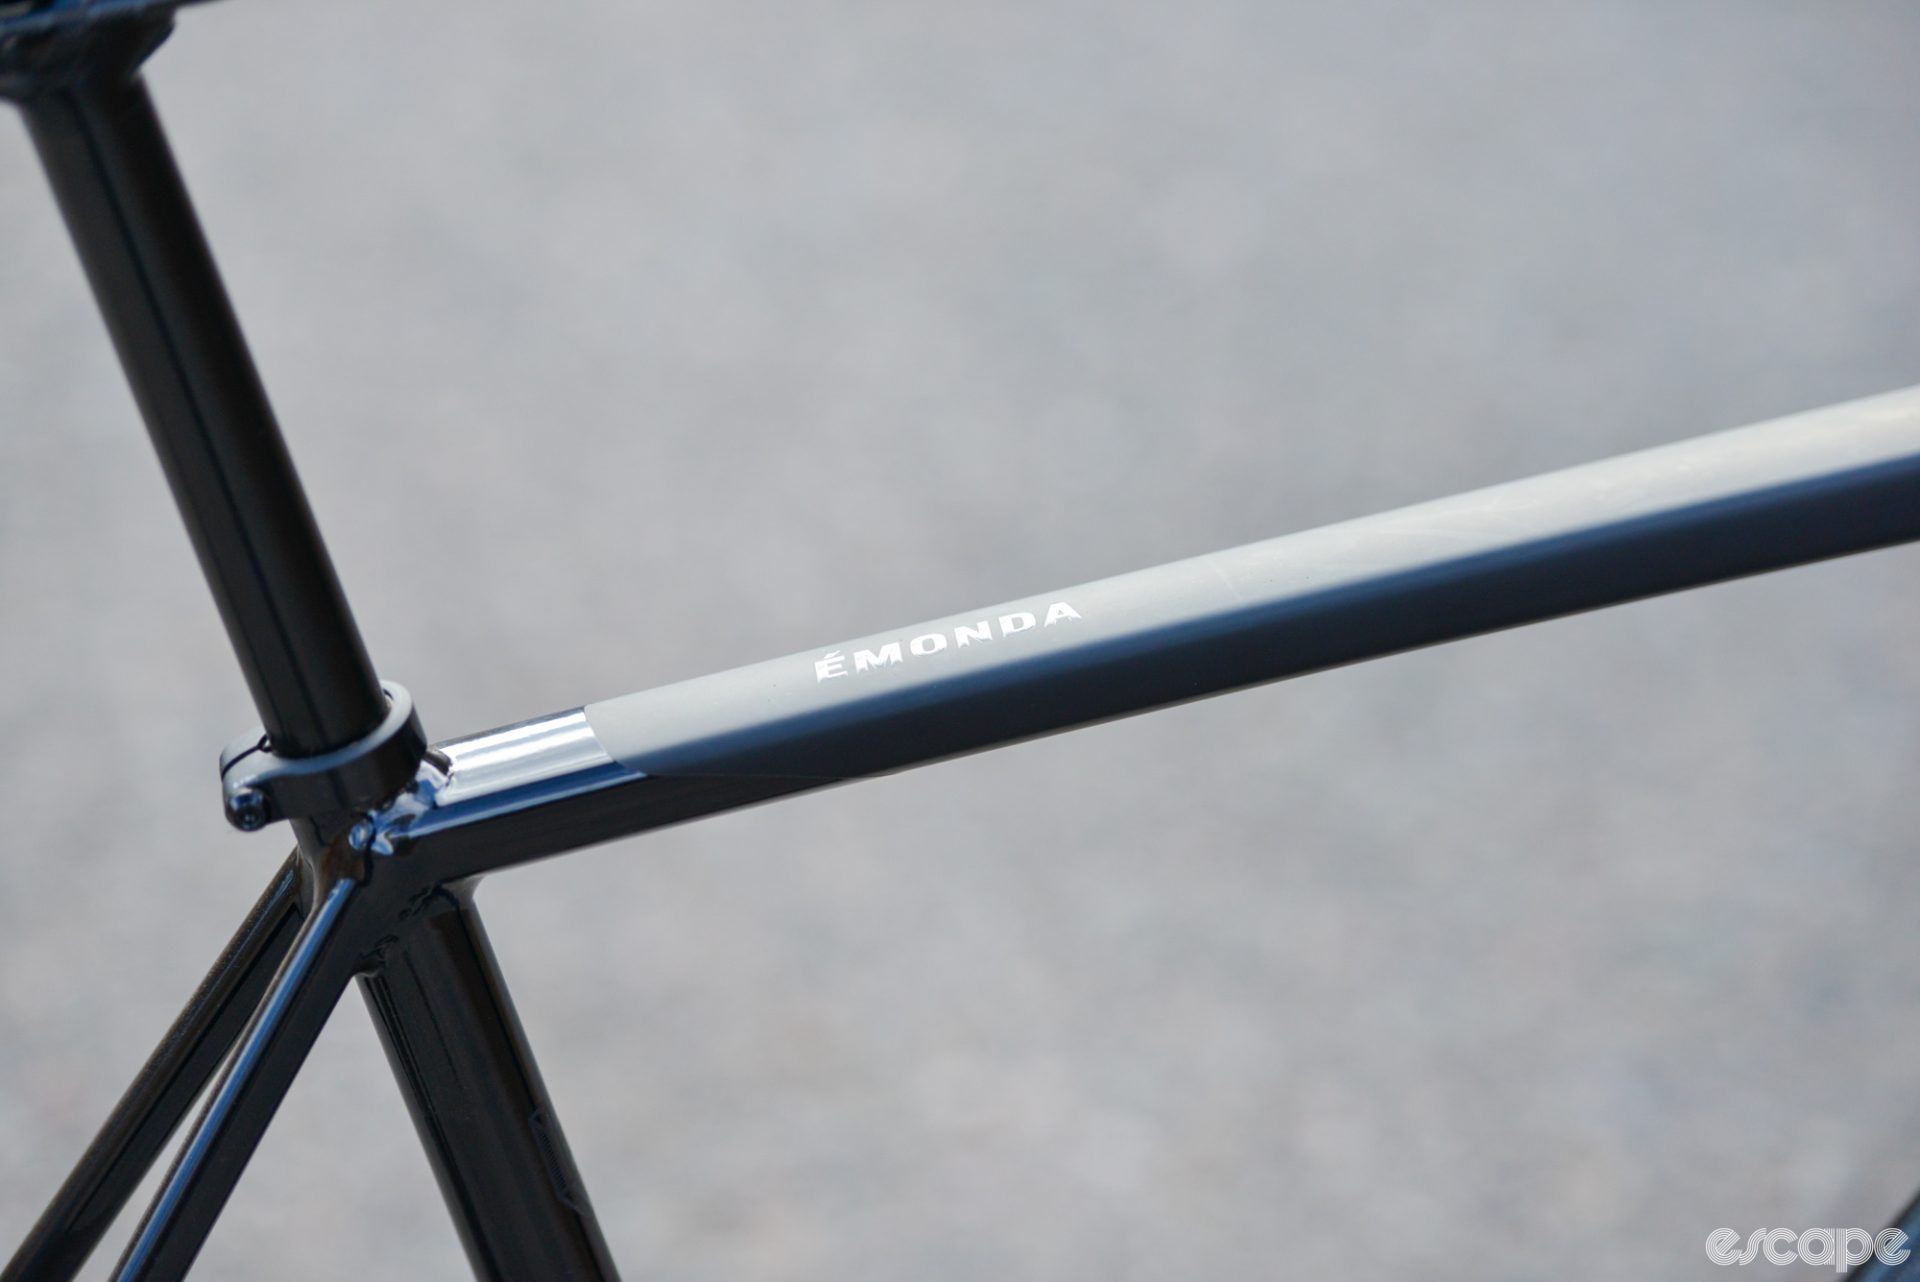 The hydroformed top tube of the Emonda ALR, showing a flattening taper as it reaches the seat cluster.